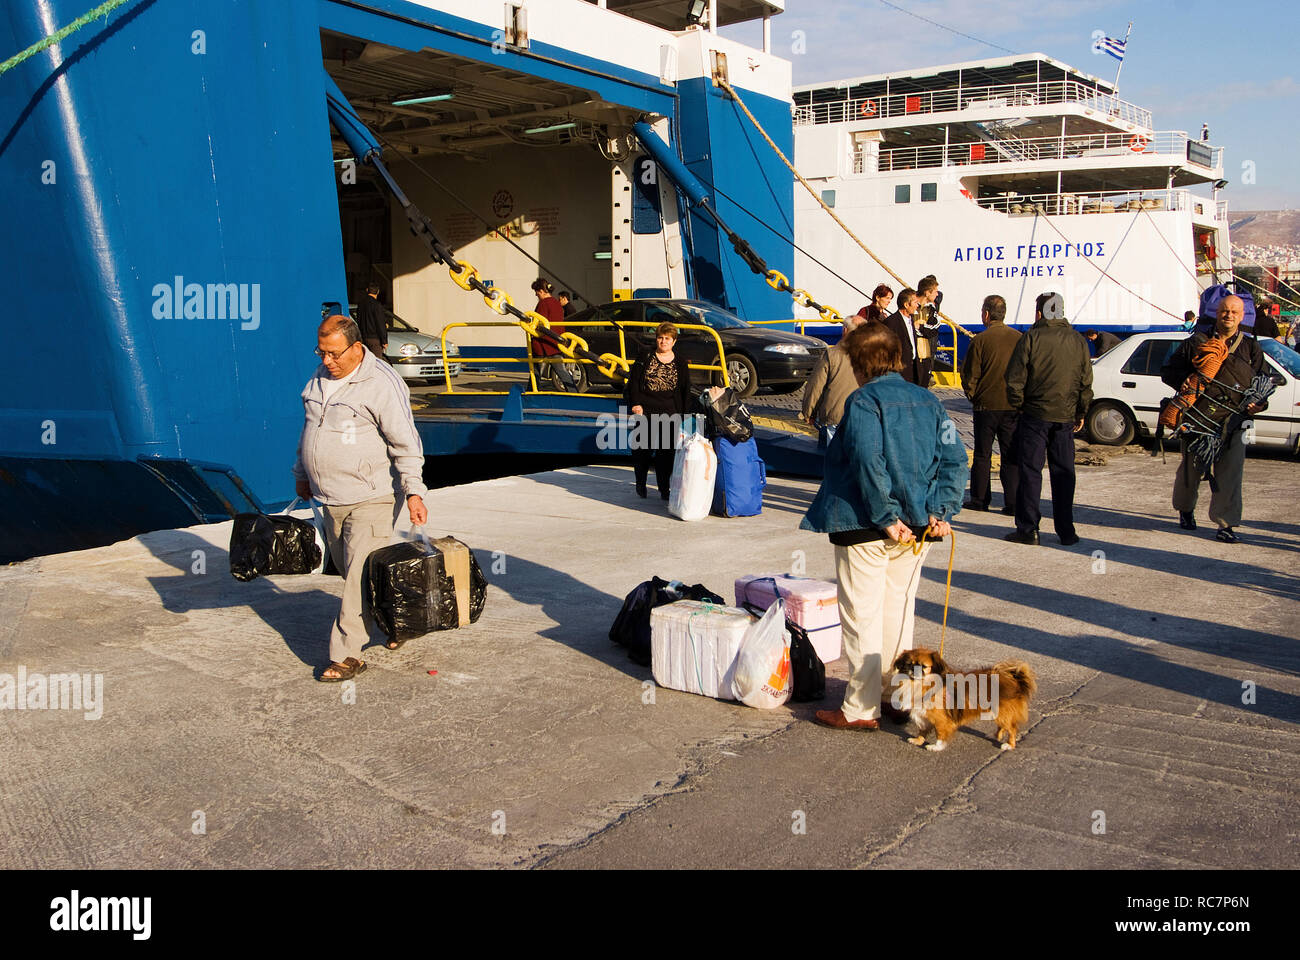 passengers disembarking from a ferry in port of Piraeus, Greece Stock Photo